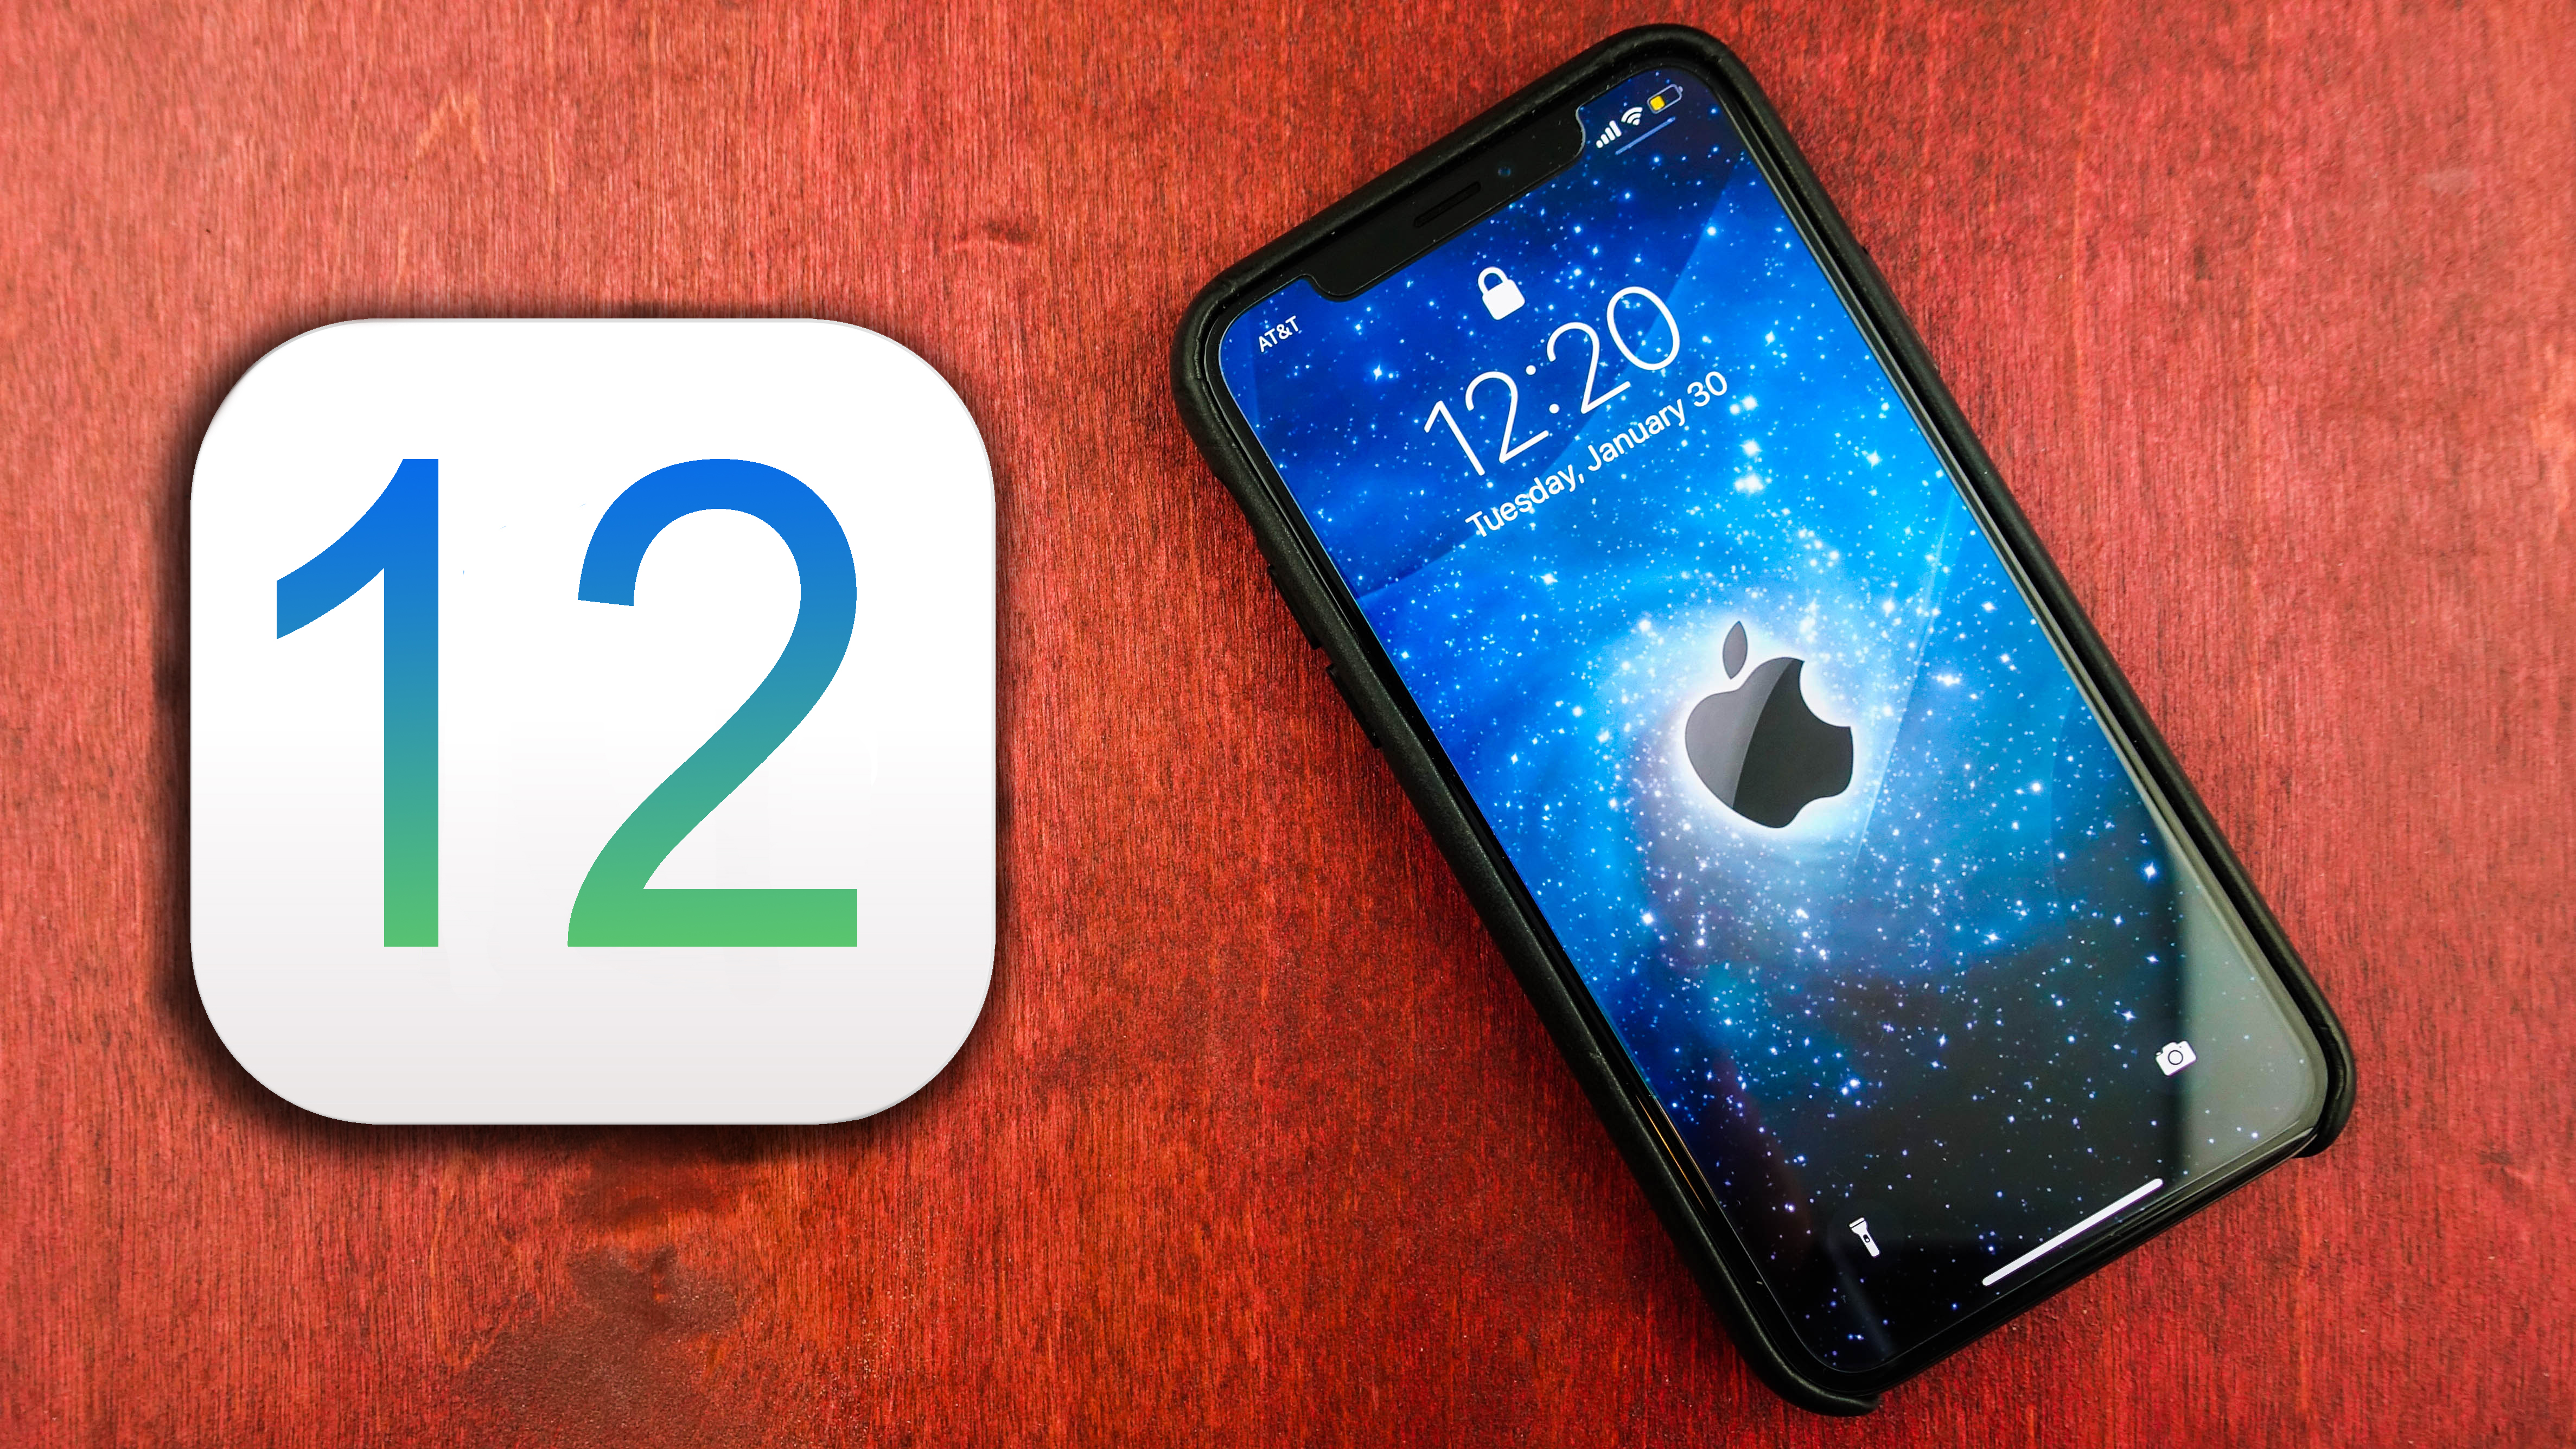 When to Expect iOS 12 Beta 2 and First iOS 12 Public Beta?